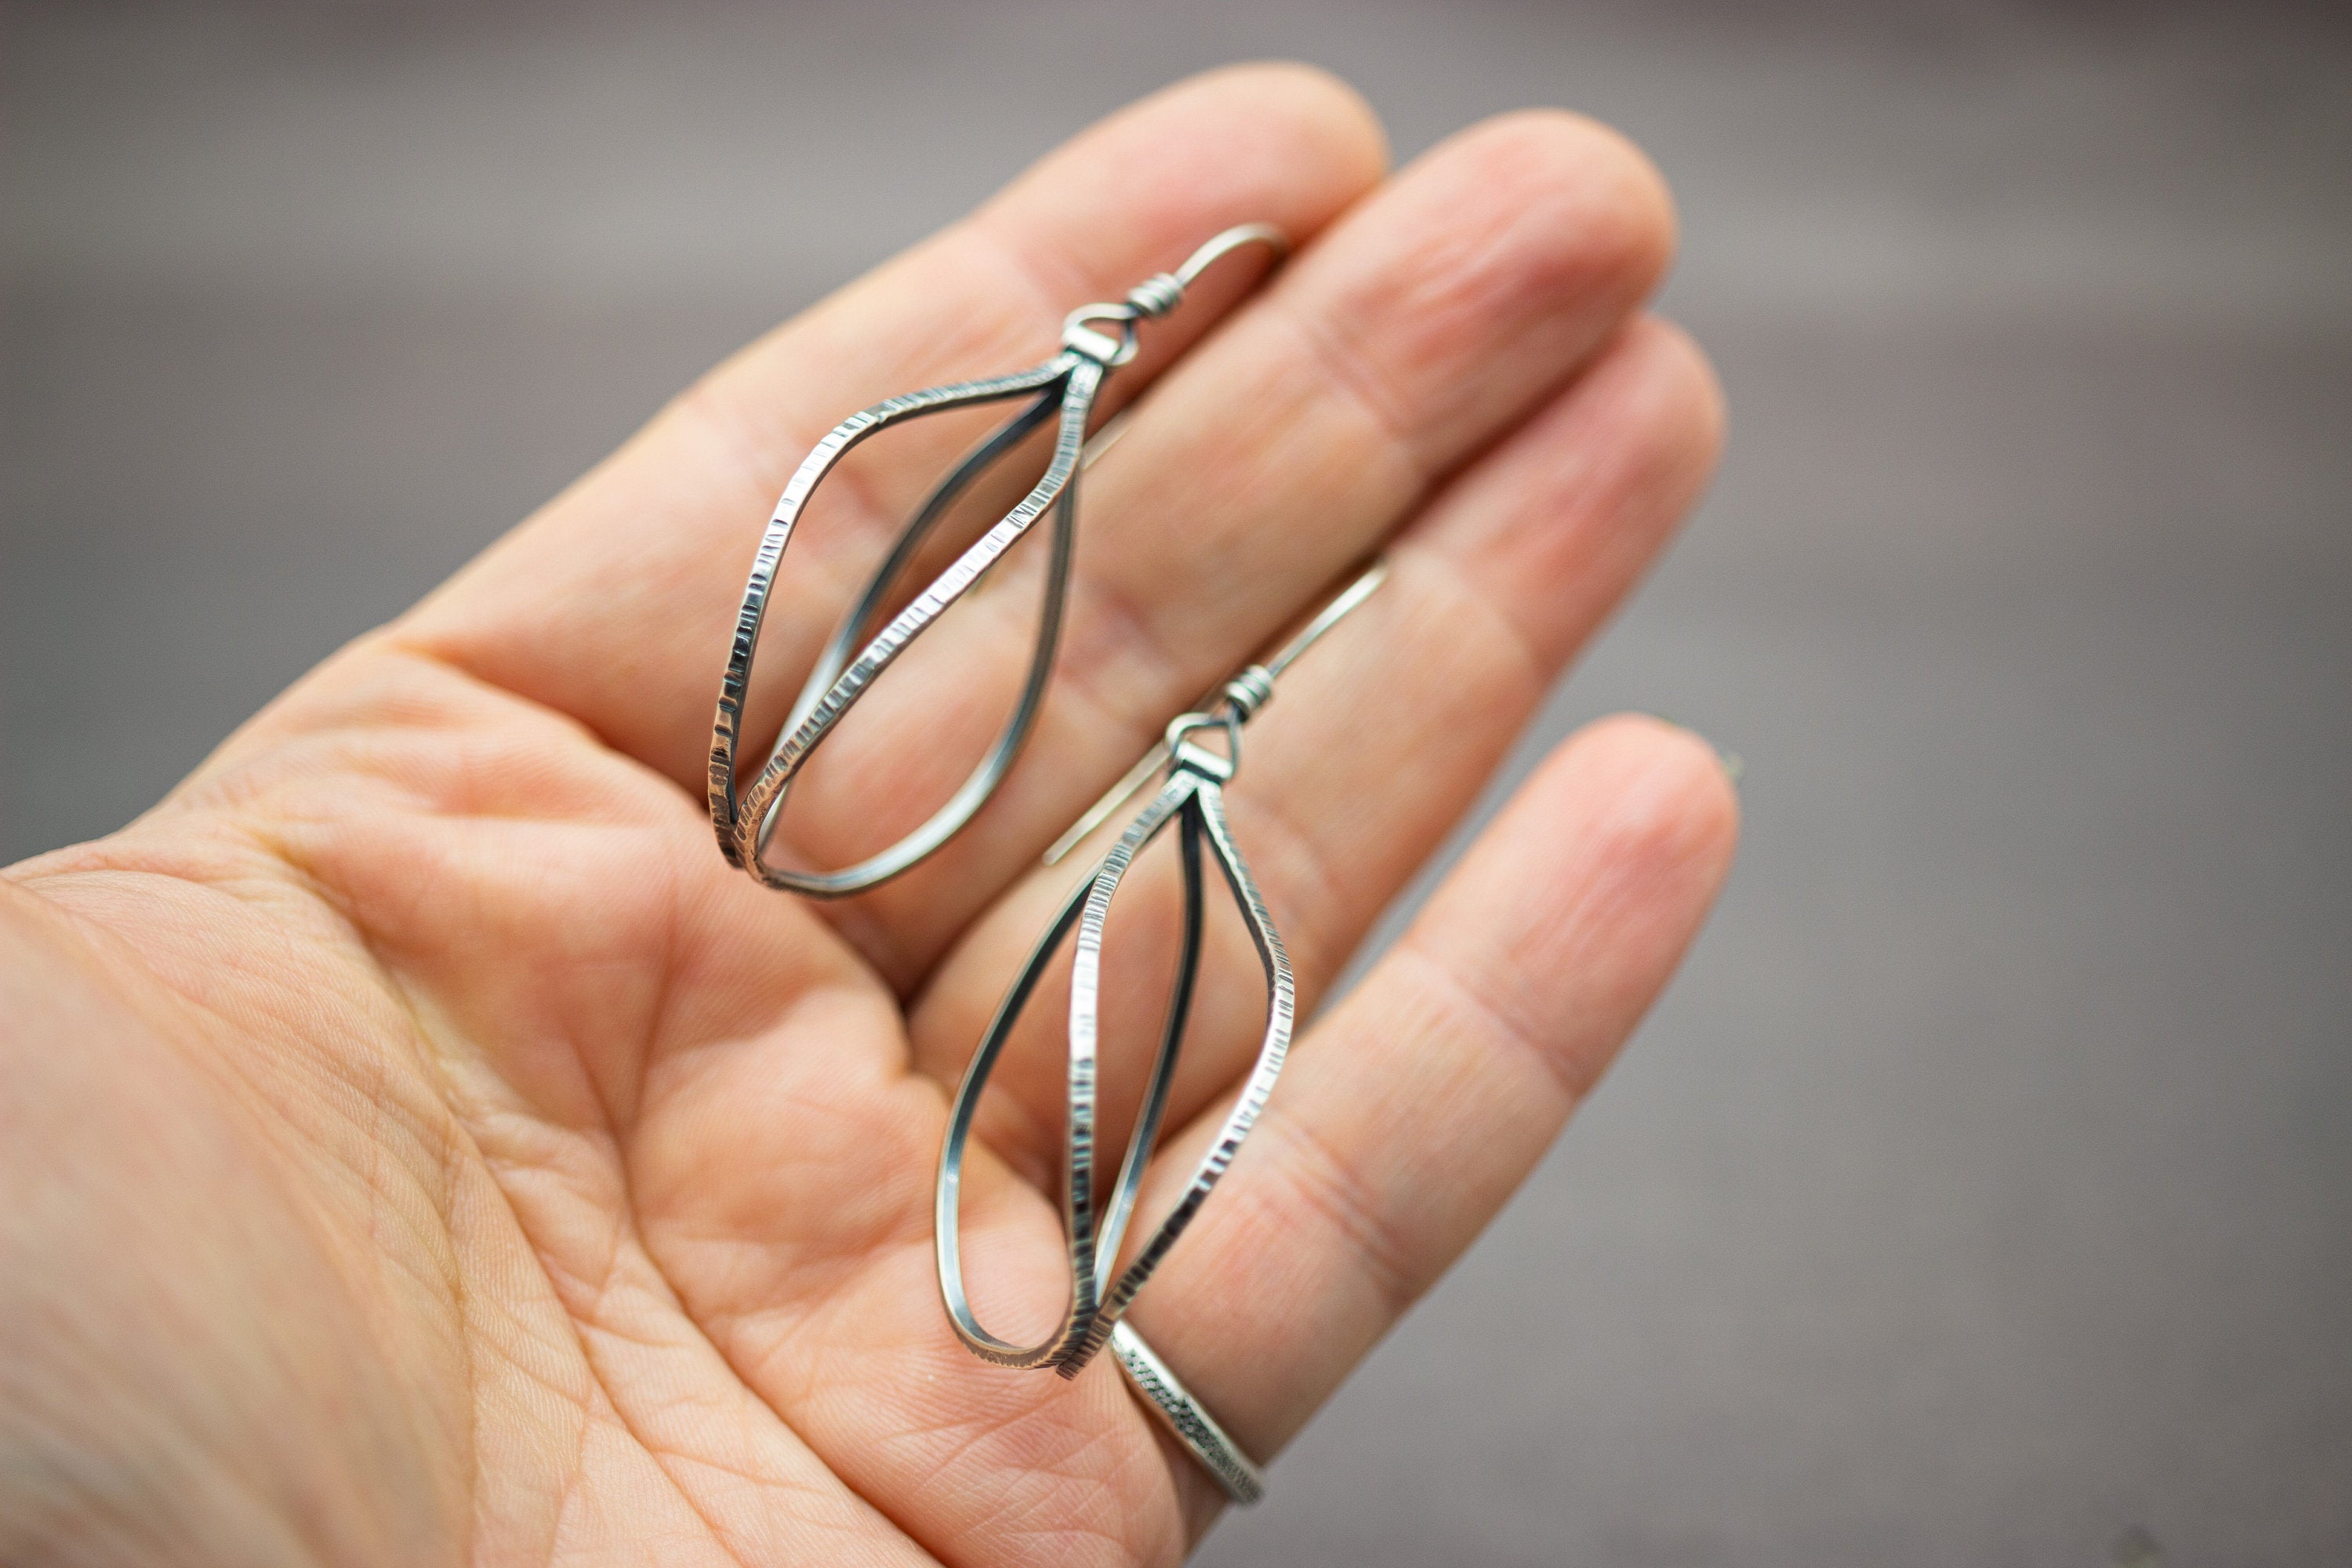 Swingy Double Hoop Drop Earrings Sterling Silver Made To Order